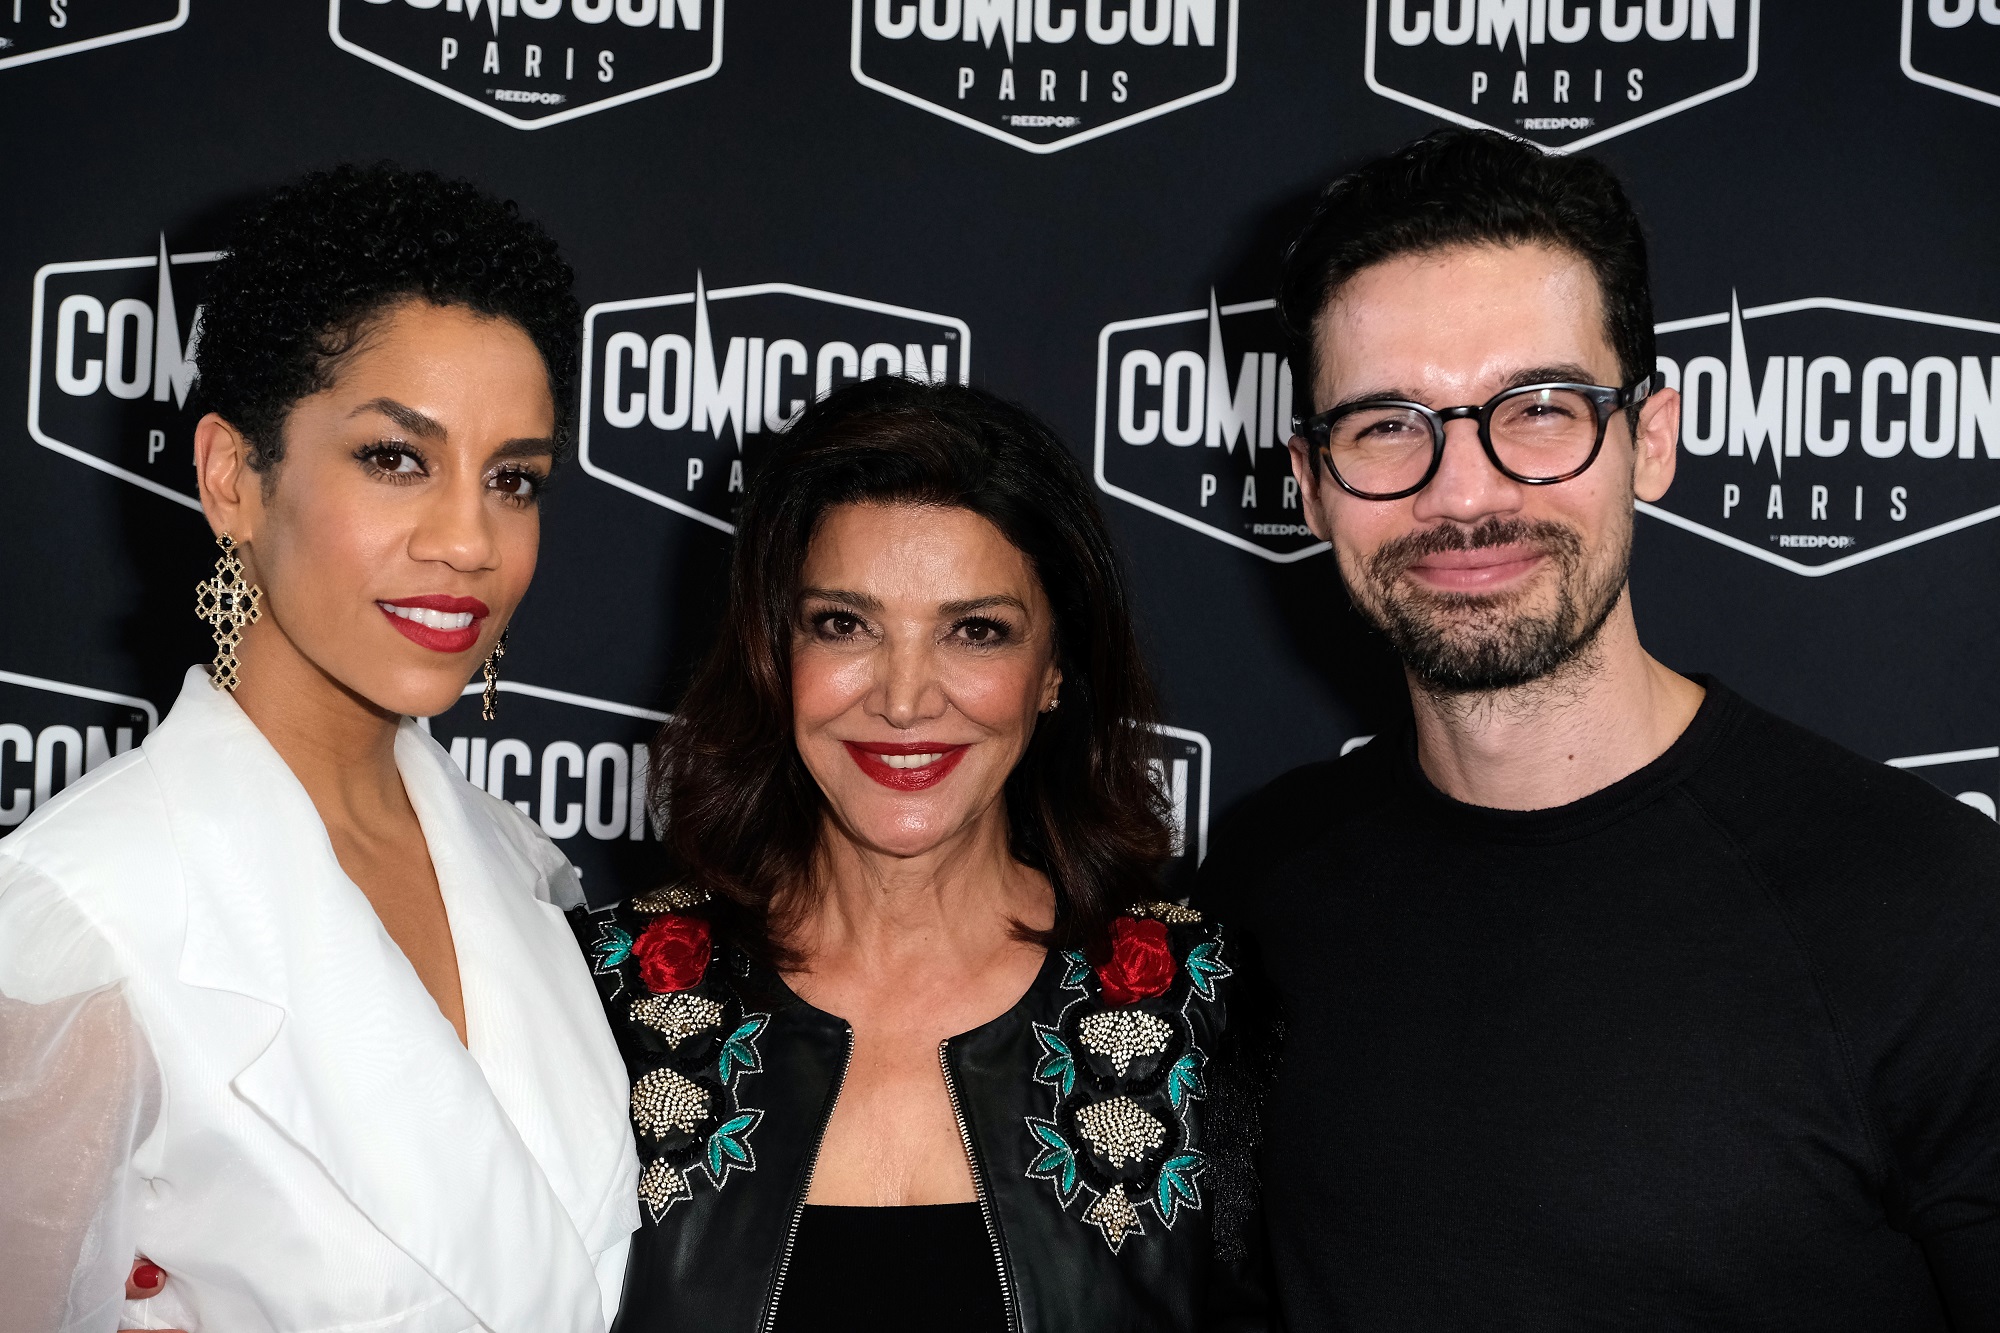 Dominique Tipper, Shohreh Aghdashloo, and Steven Strait of The Expanse